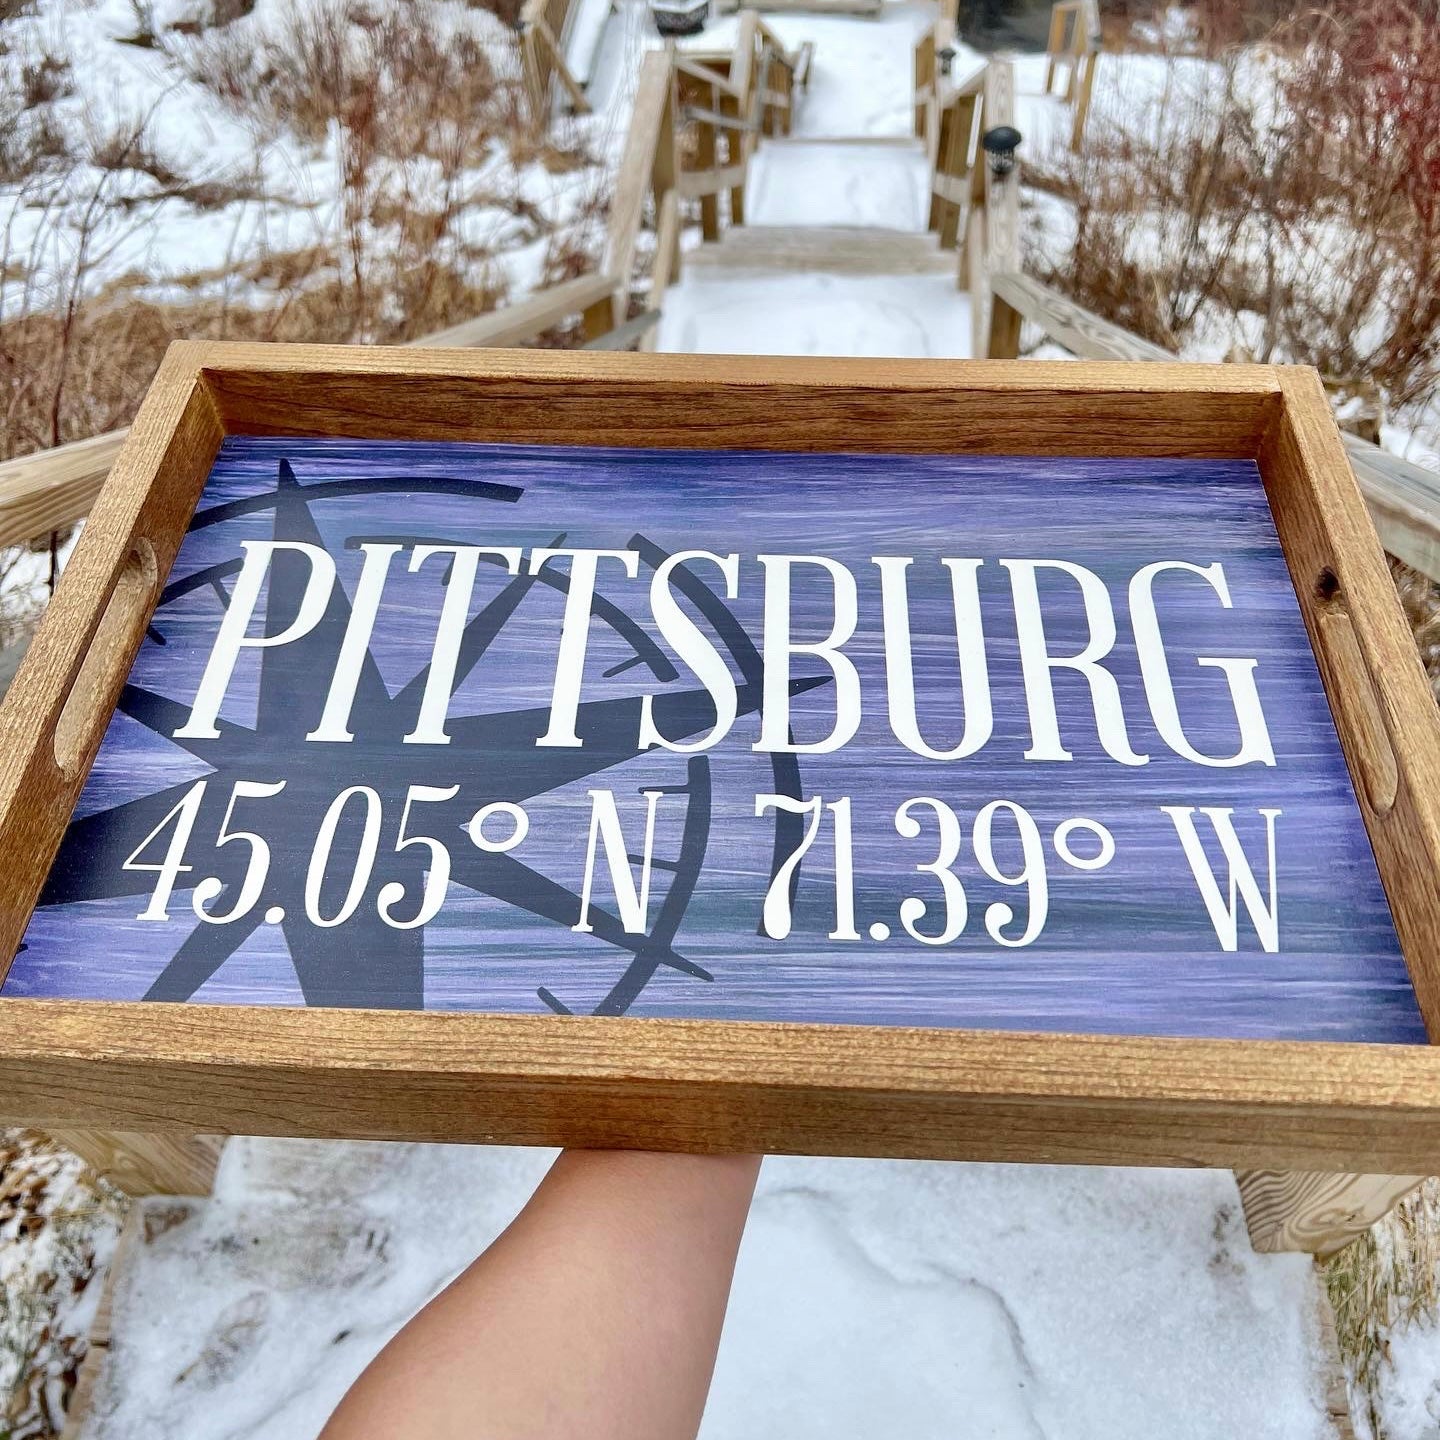 Pittsburg Compass + Coordinates Wooden Serving Tray